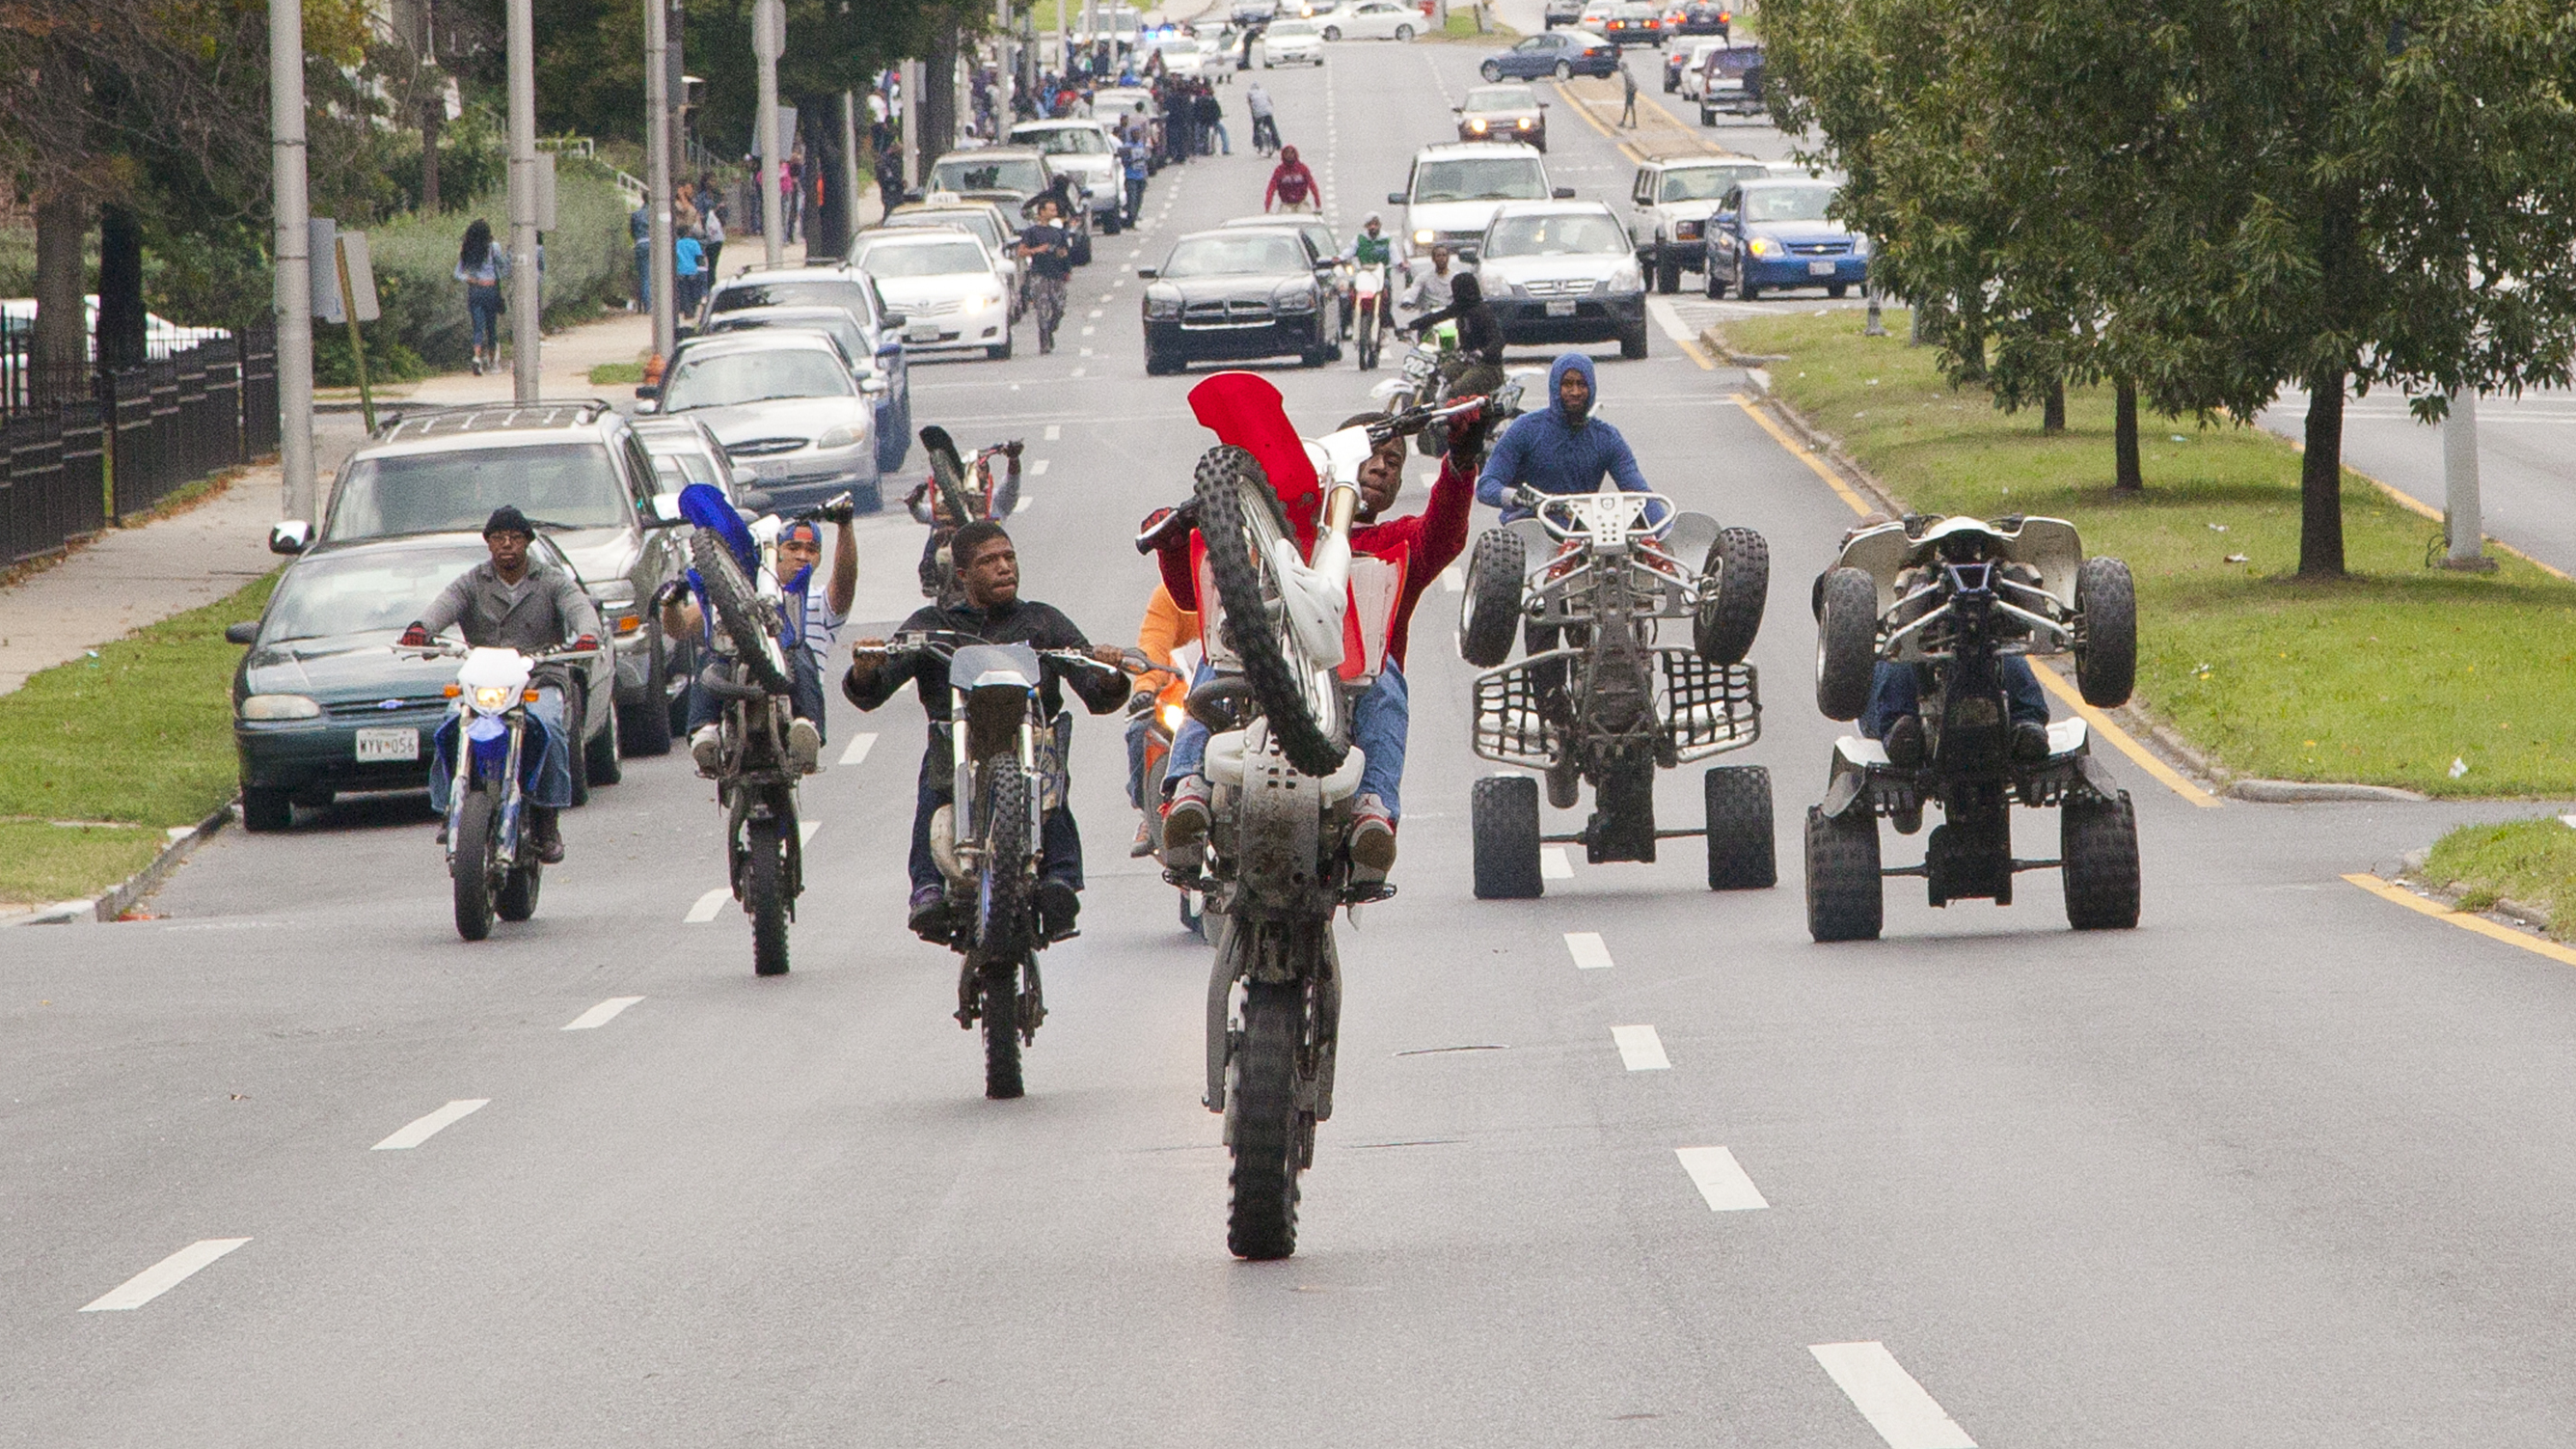 Take A Ride With Baltimore's Renegade Bikers, The '12 O'Clock Boys